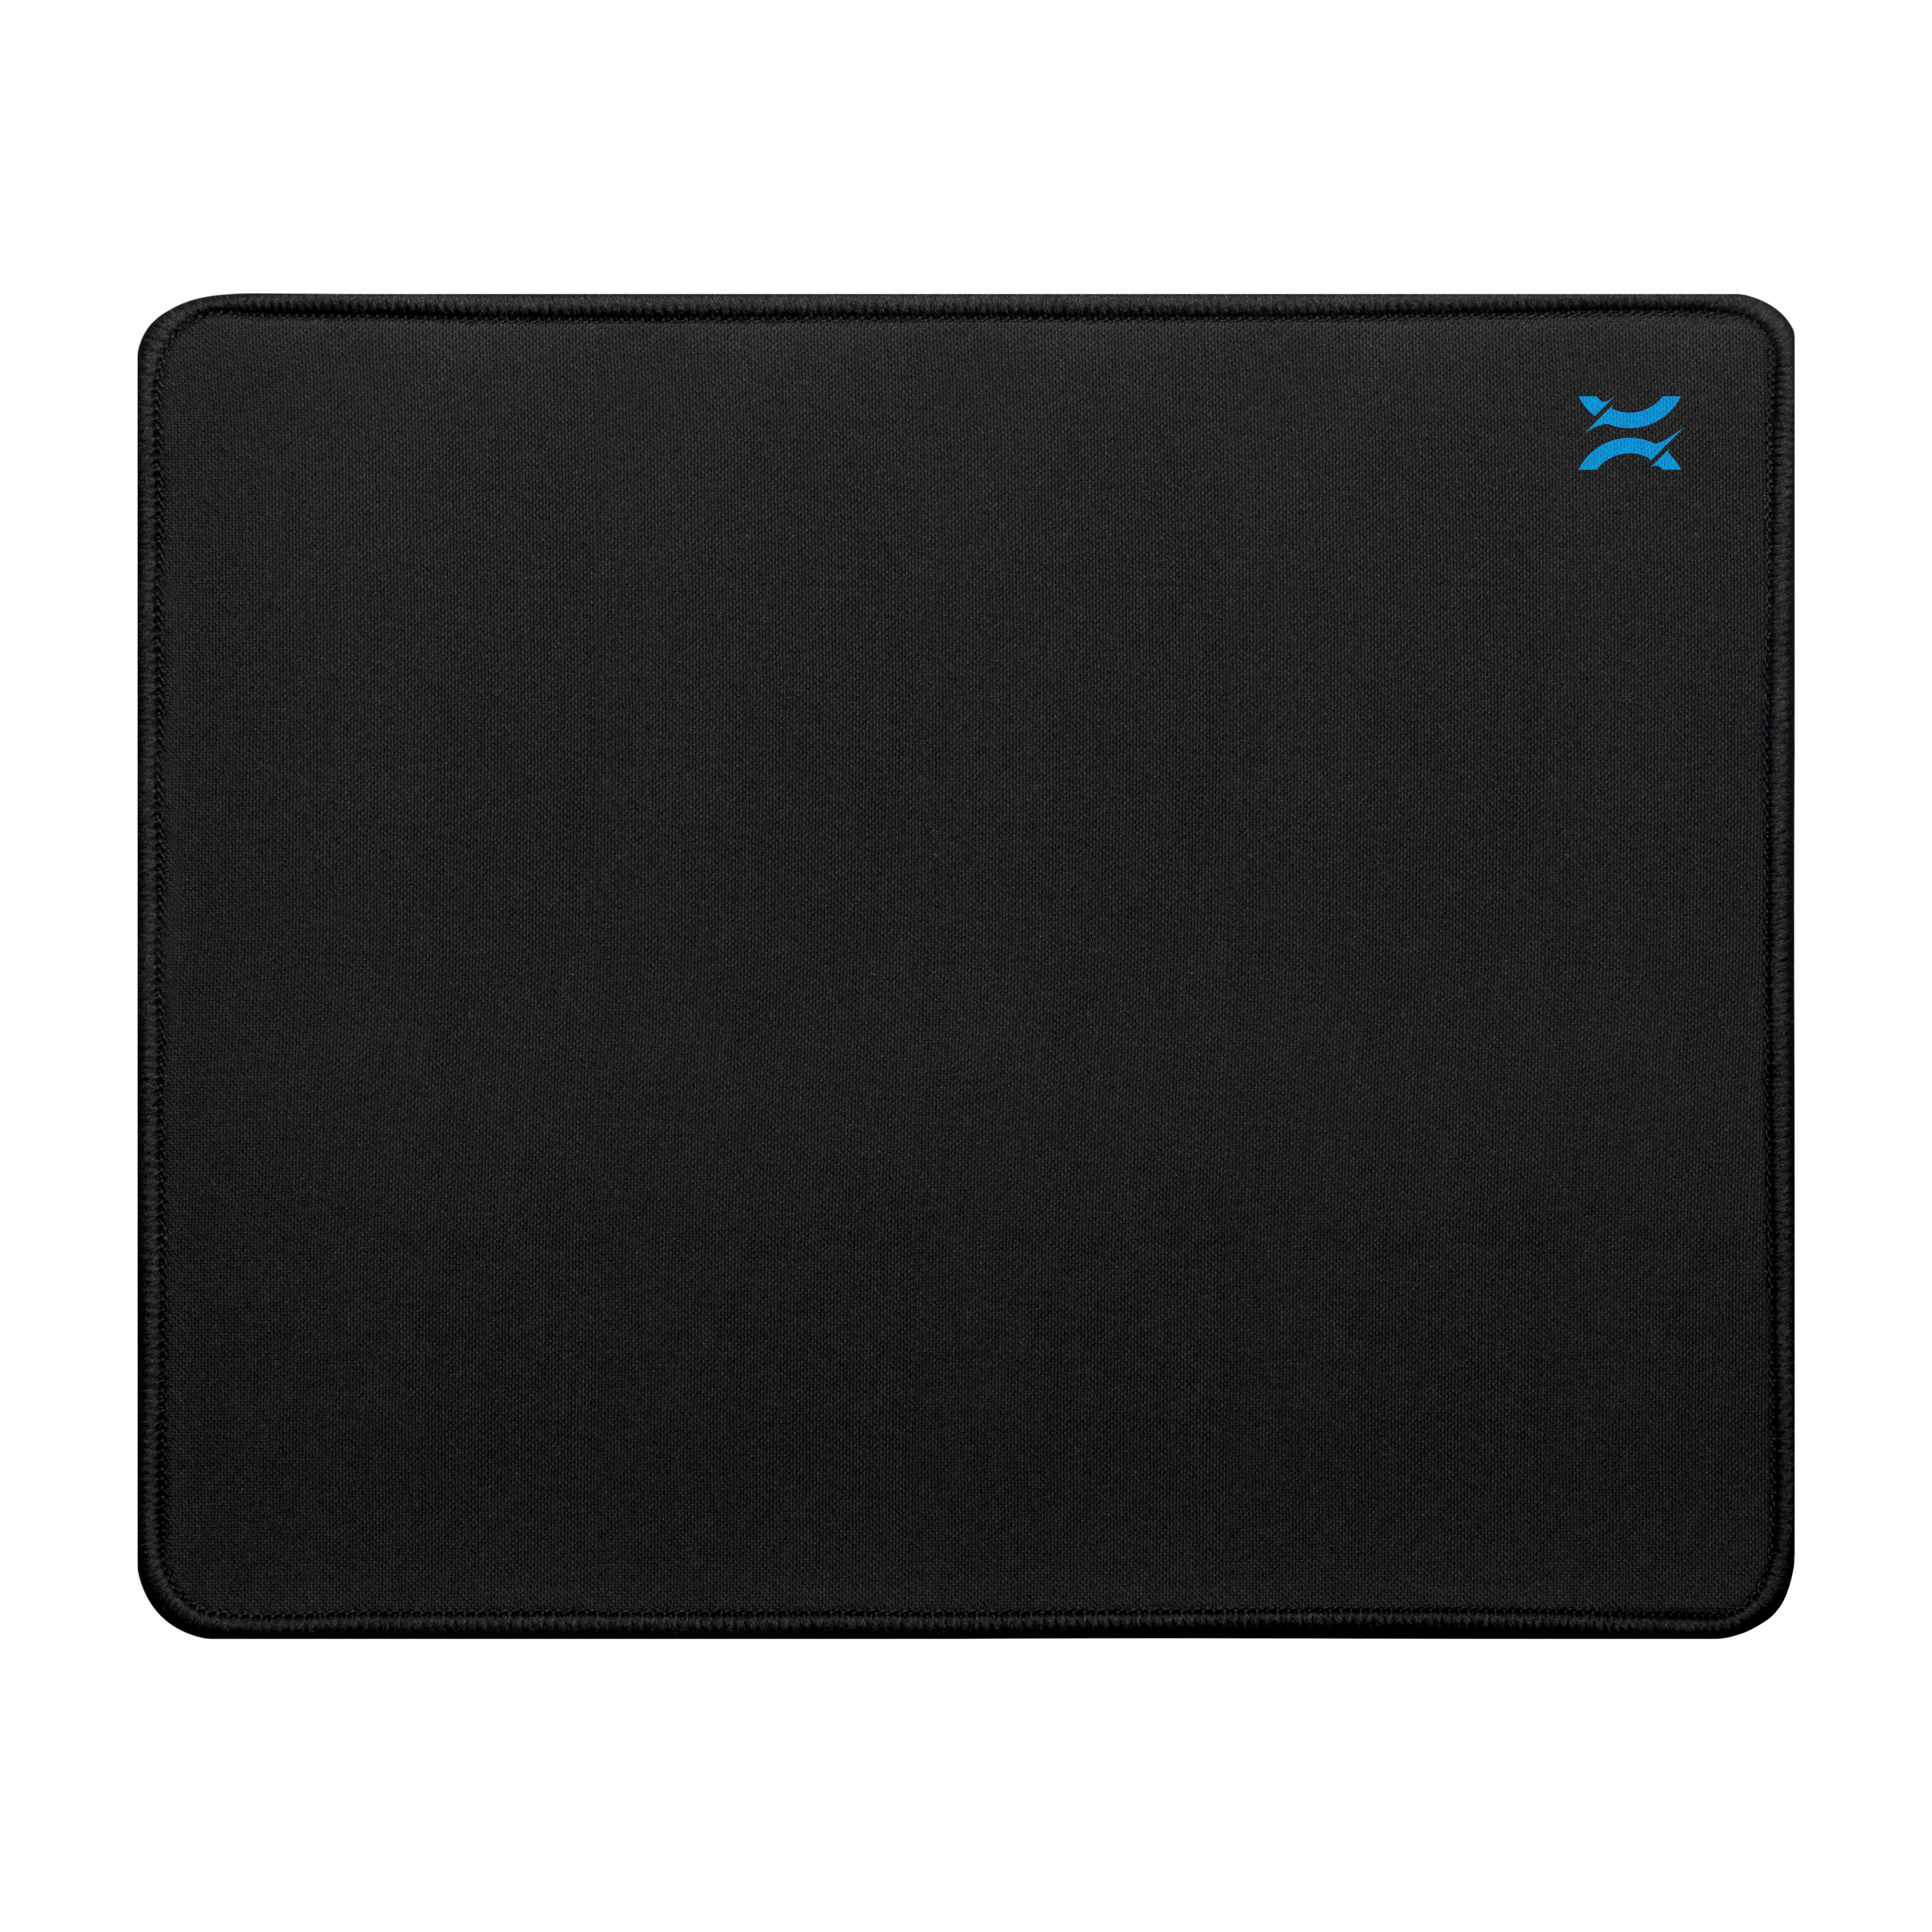 NOXO  Precision Gaming mouse pad, M